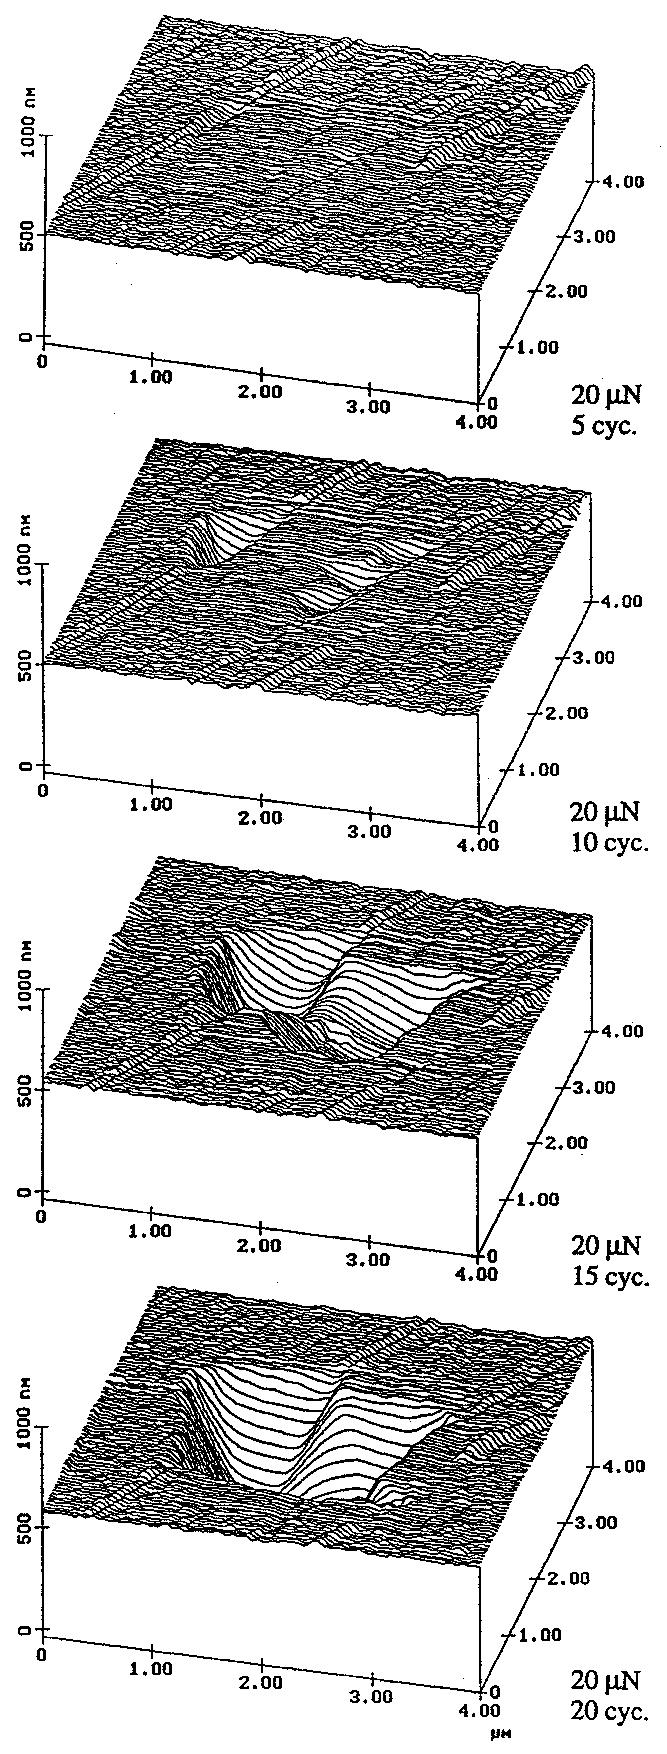 FIGURE 19.28 Surface plots of diamond-like carbon-coated thin-film disk showing the worn region; the normal load and number of test cycles are indicated. (From Bhushan, B., Koinkar, V.N., and Ruan, J.